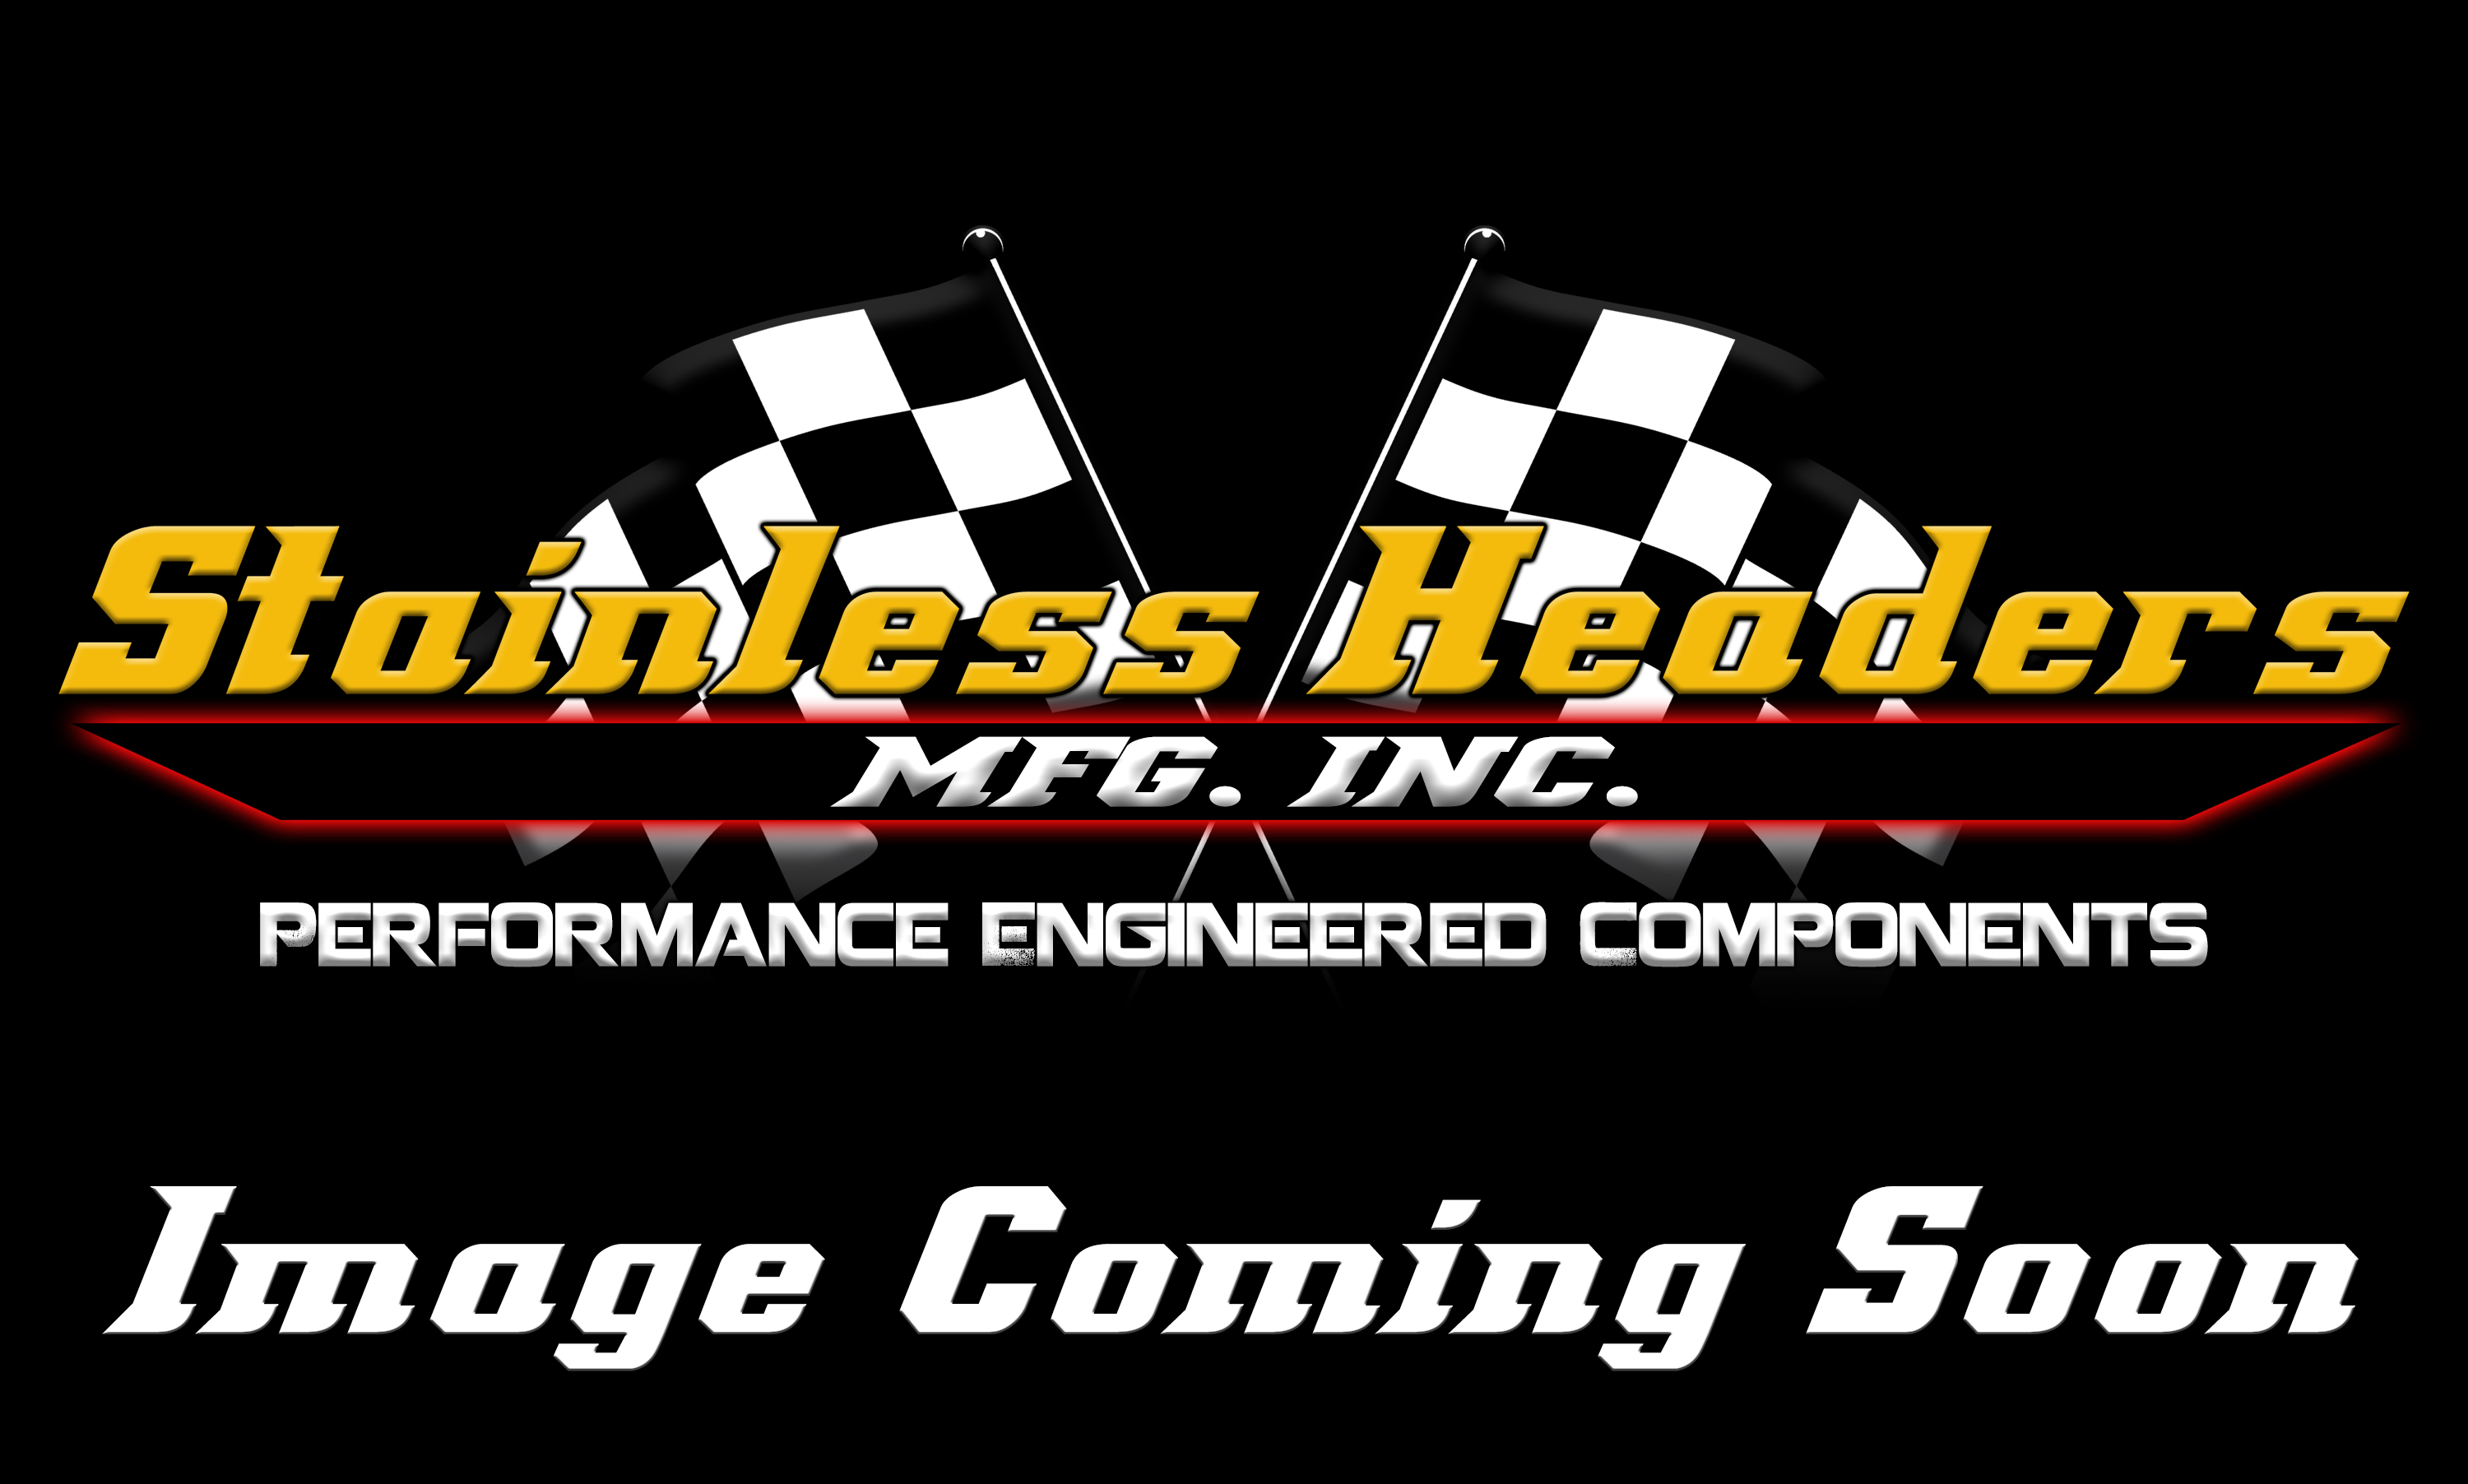 Stainless Headers - 2 3/8" Primary 8 into 1 Performance Merge Collector-16ga 304ss